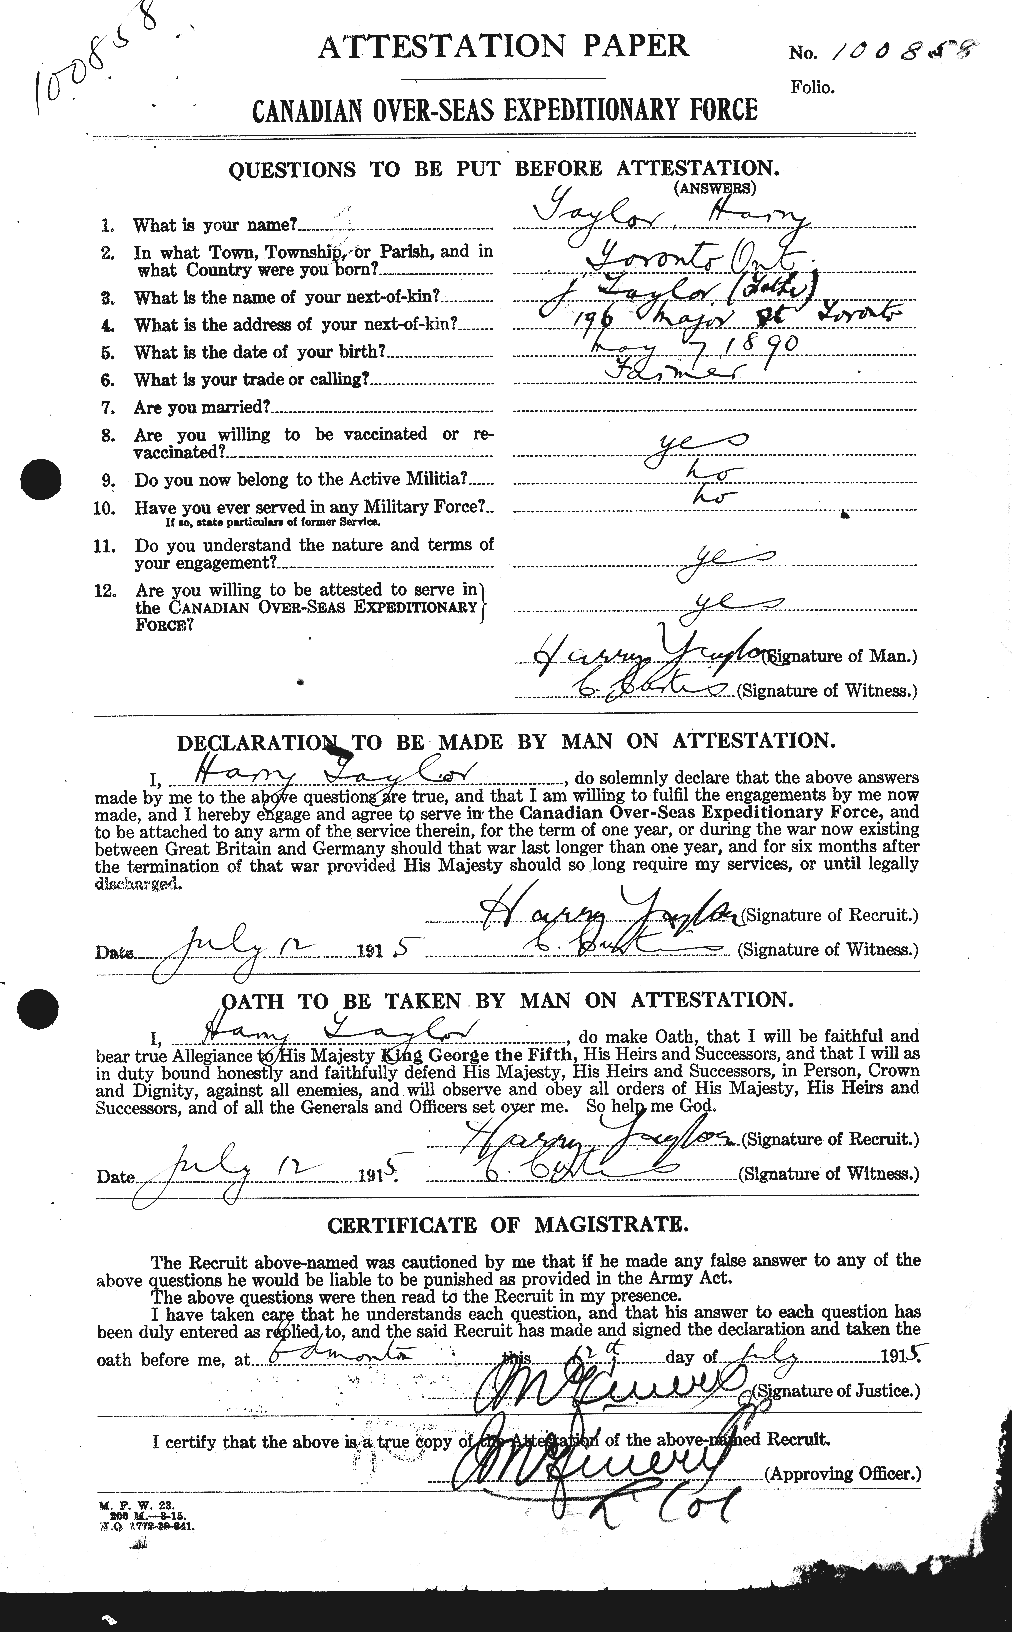 Personnel Records of the First World War - CEF 626471a